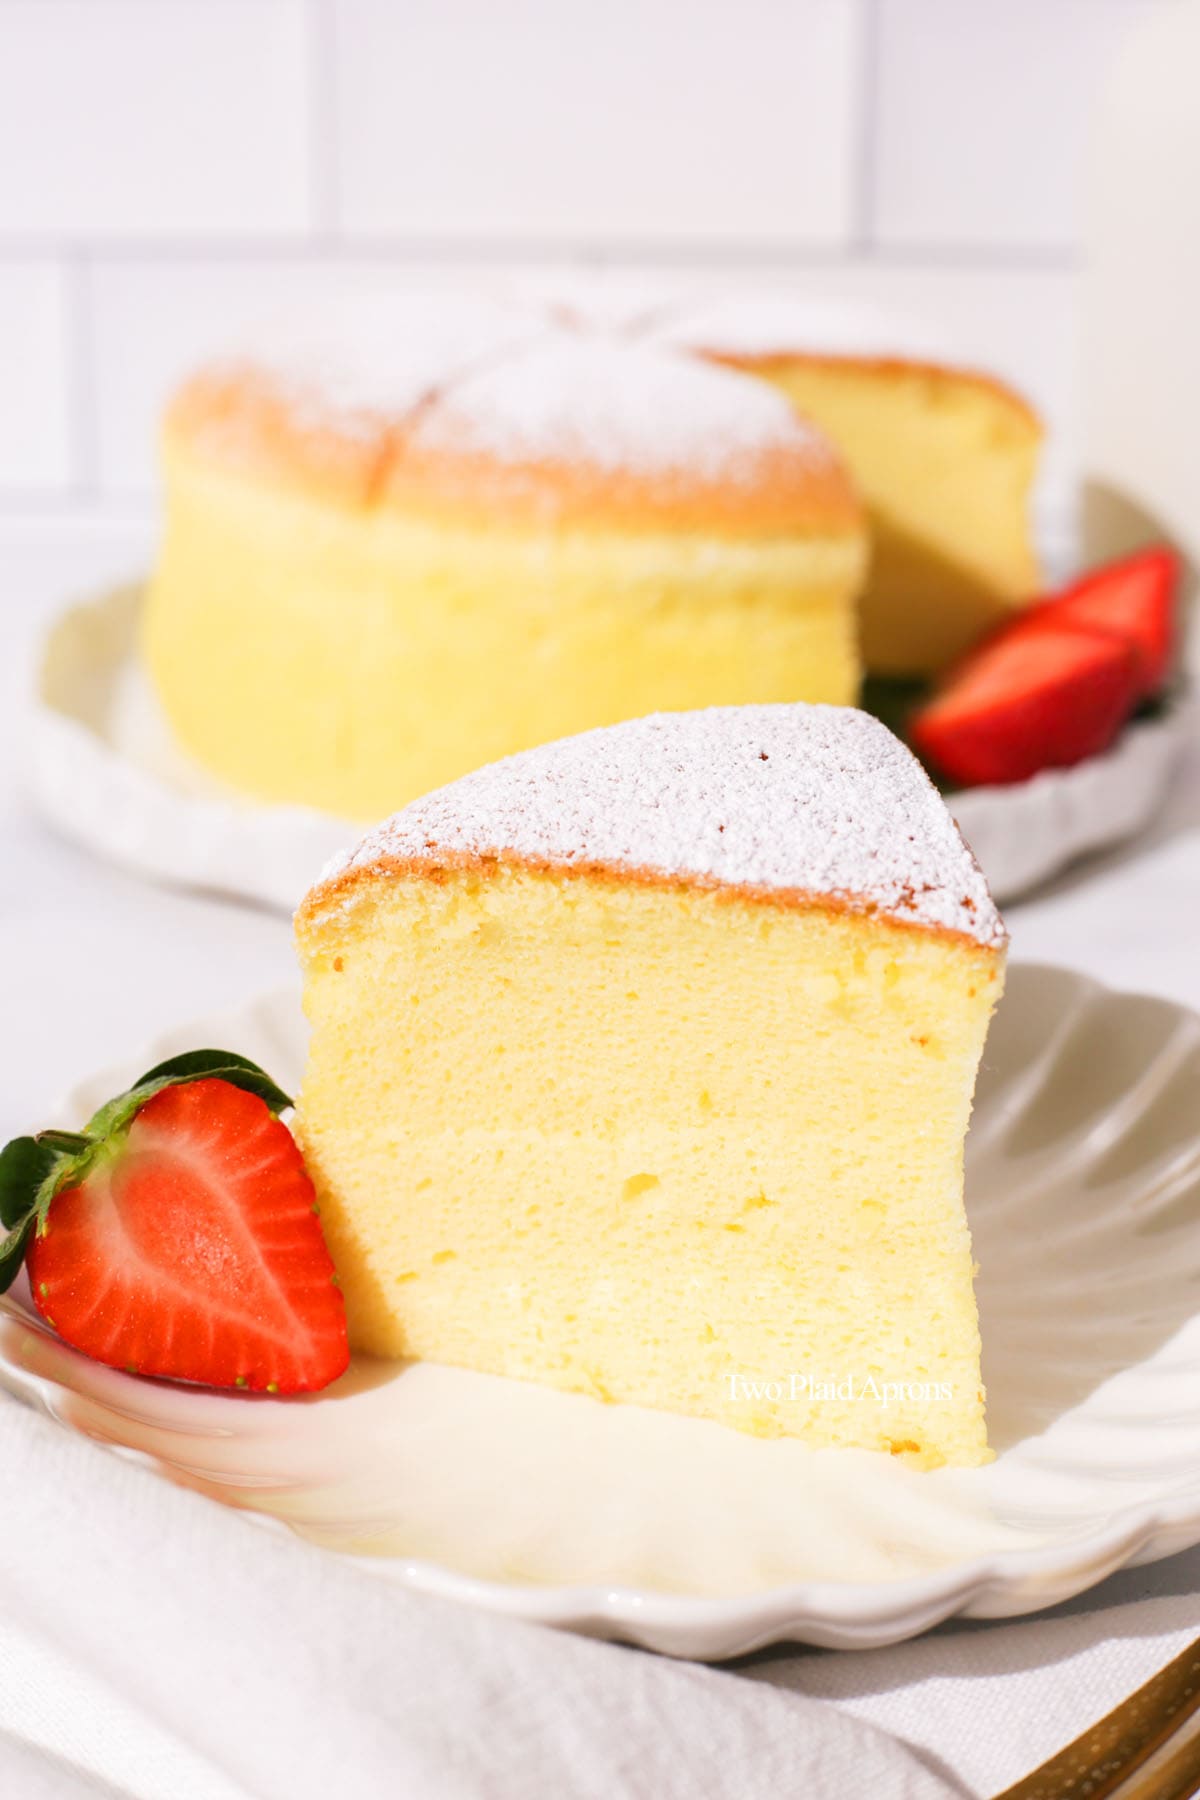 A slice of Japanese cotton cheesecake on a plate.